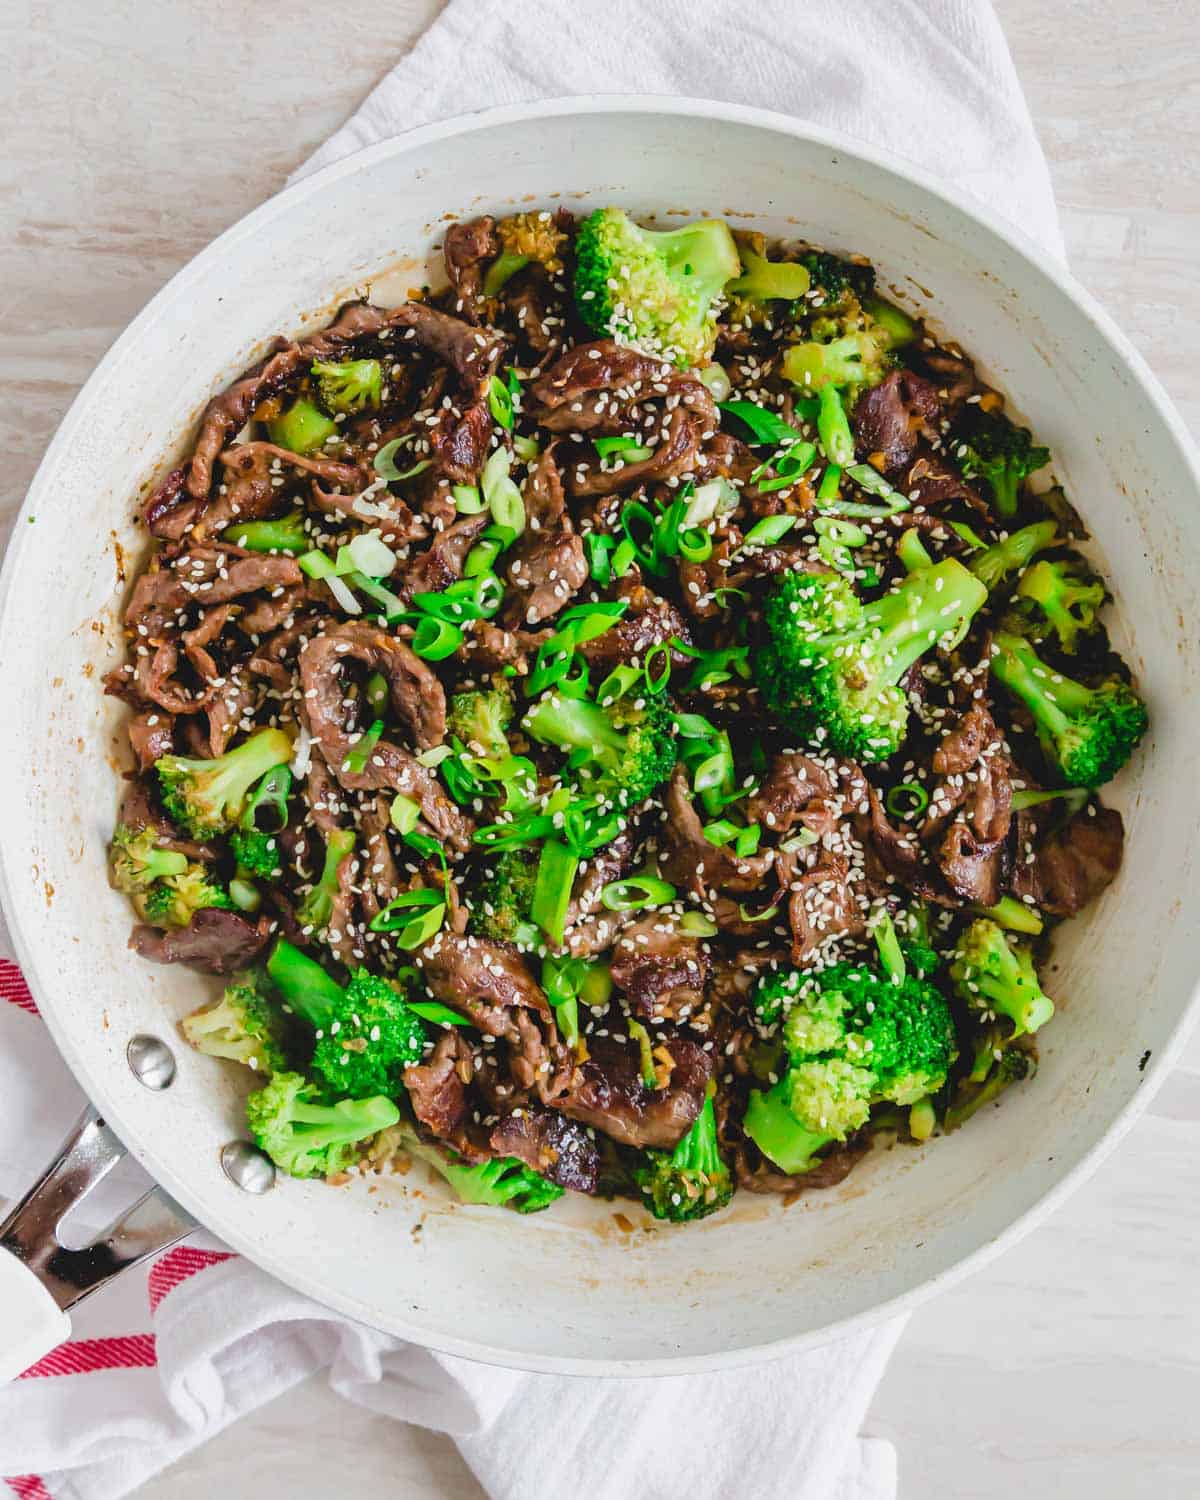 Shaved beef recipe with broccoli in a skillet.